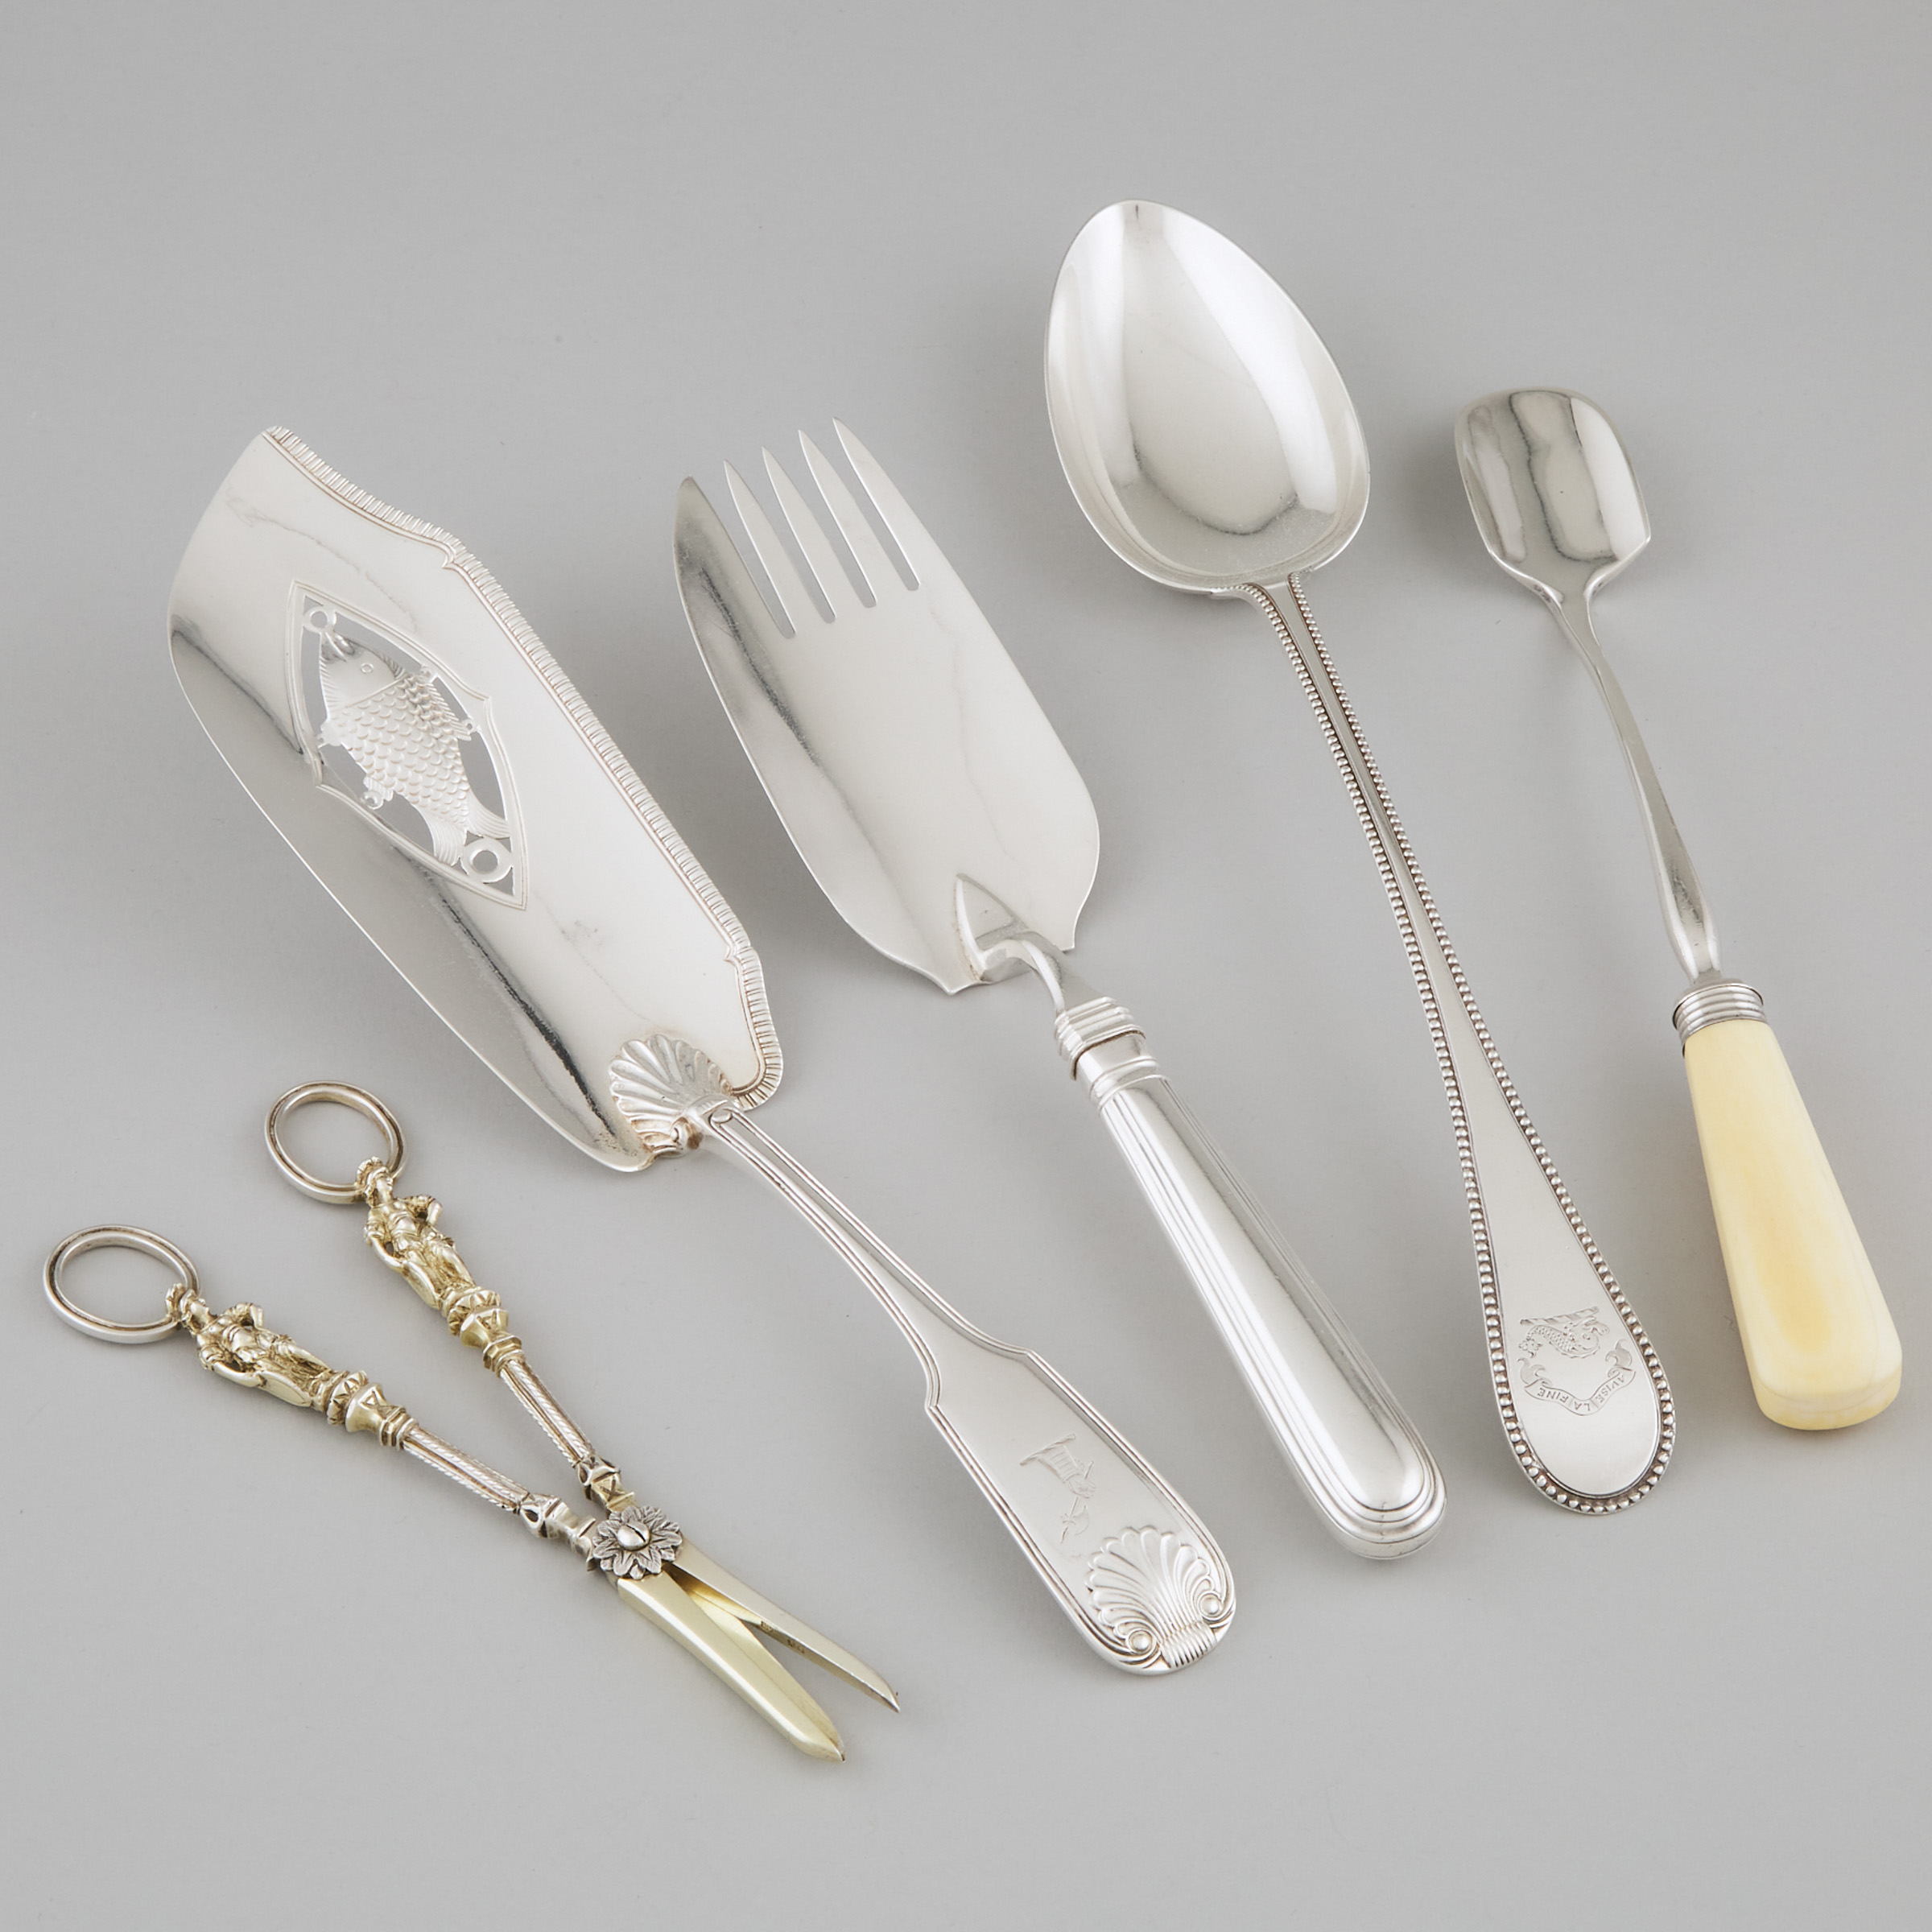 Two Georgian Silver Fish Slices, Victorian Silver-Gilt Grape Shears, Serving Spoon and a Stilton Scoop, c.1814-76